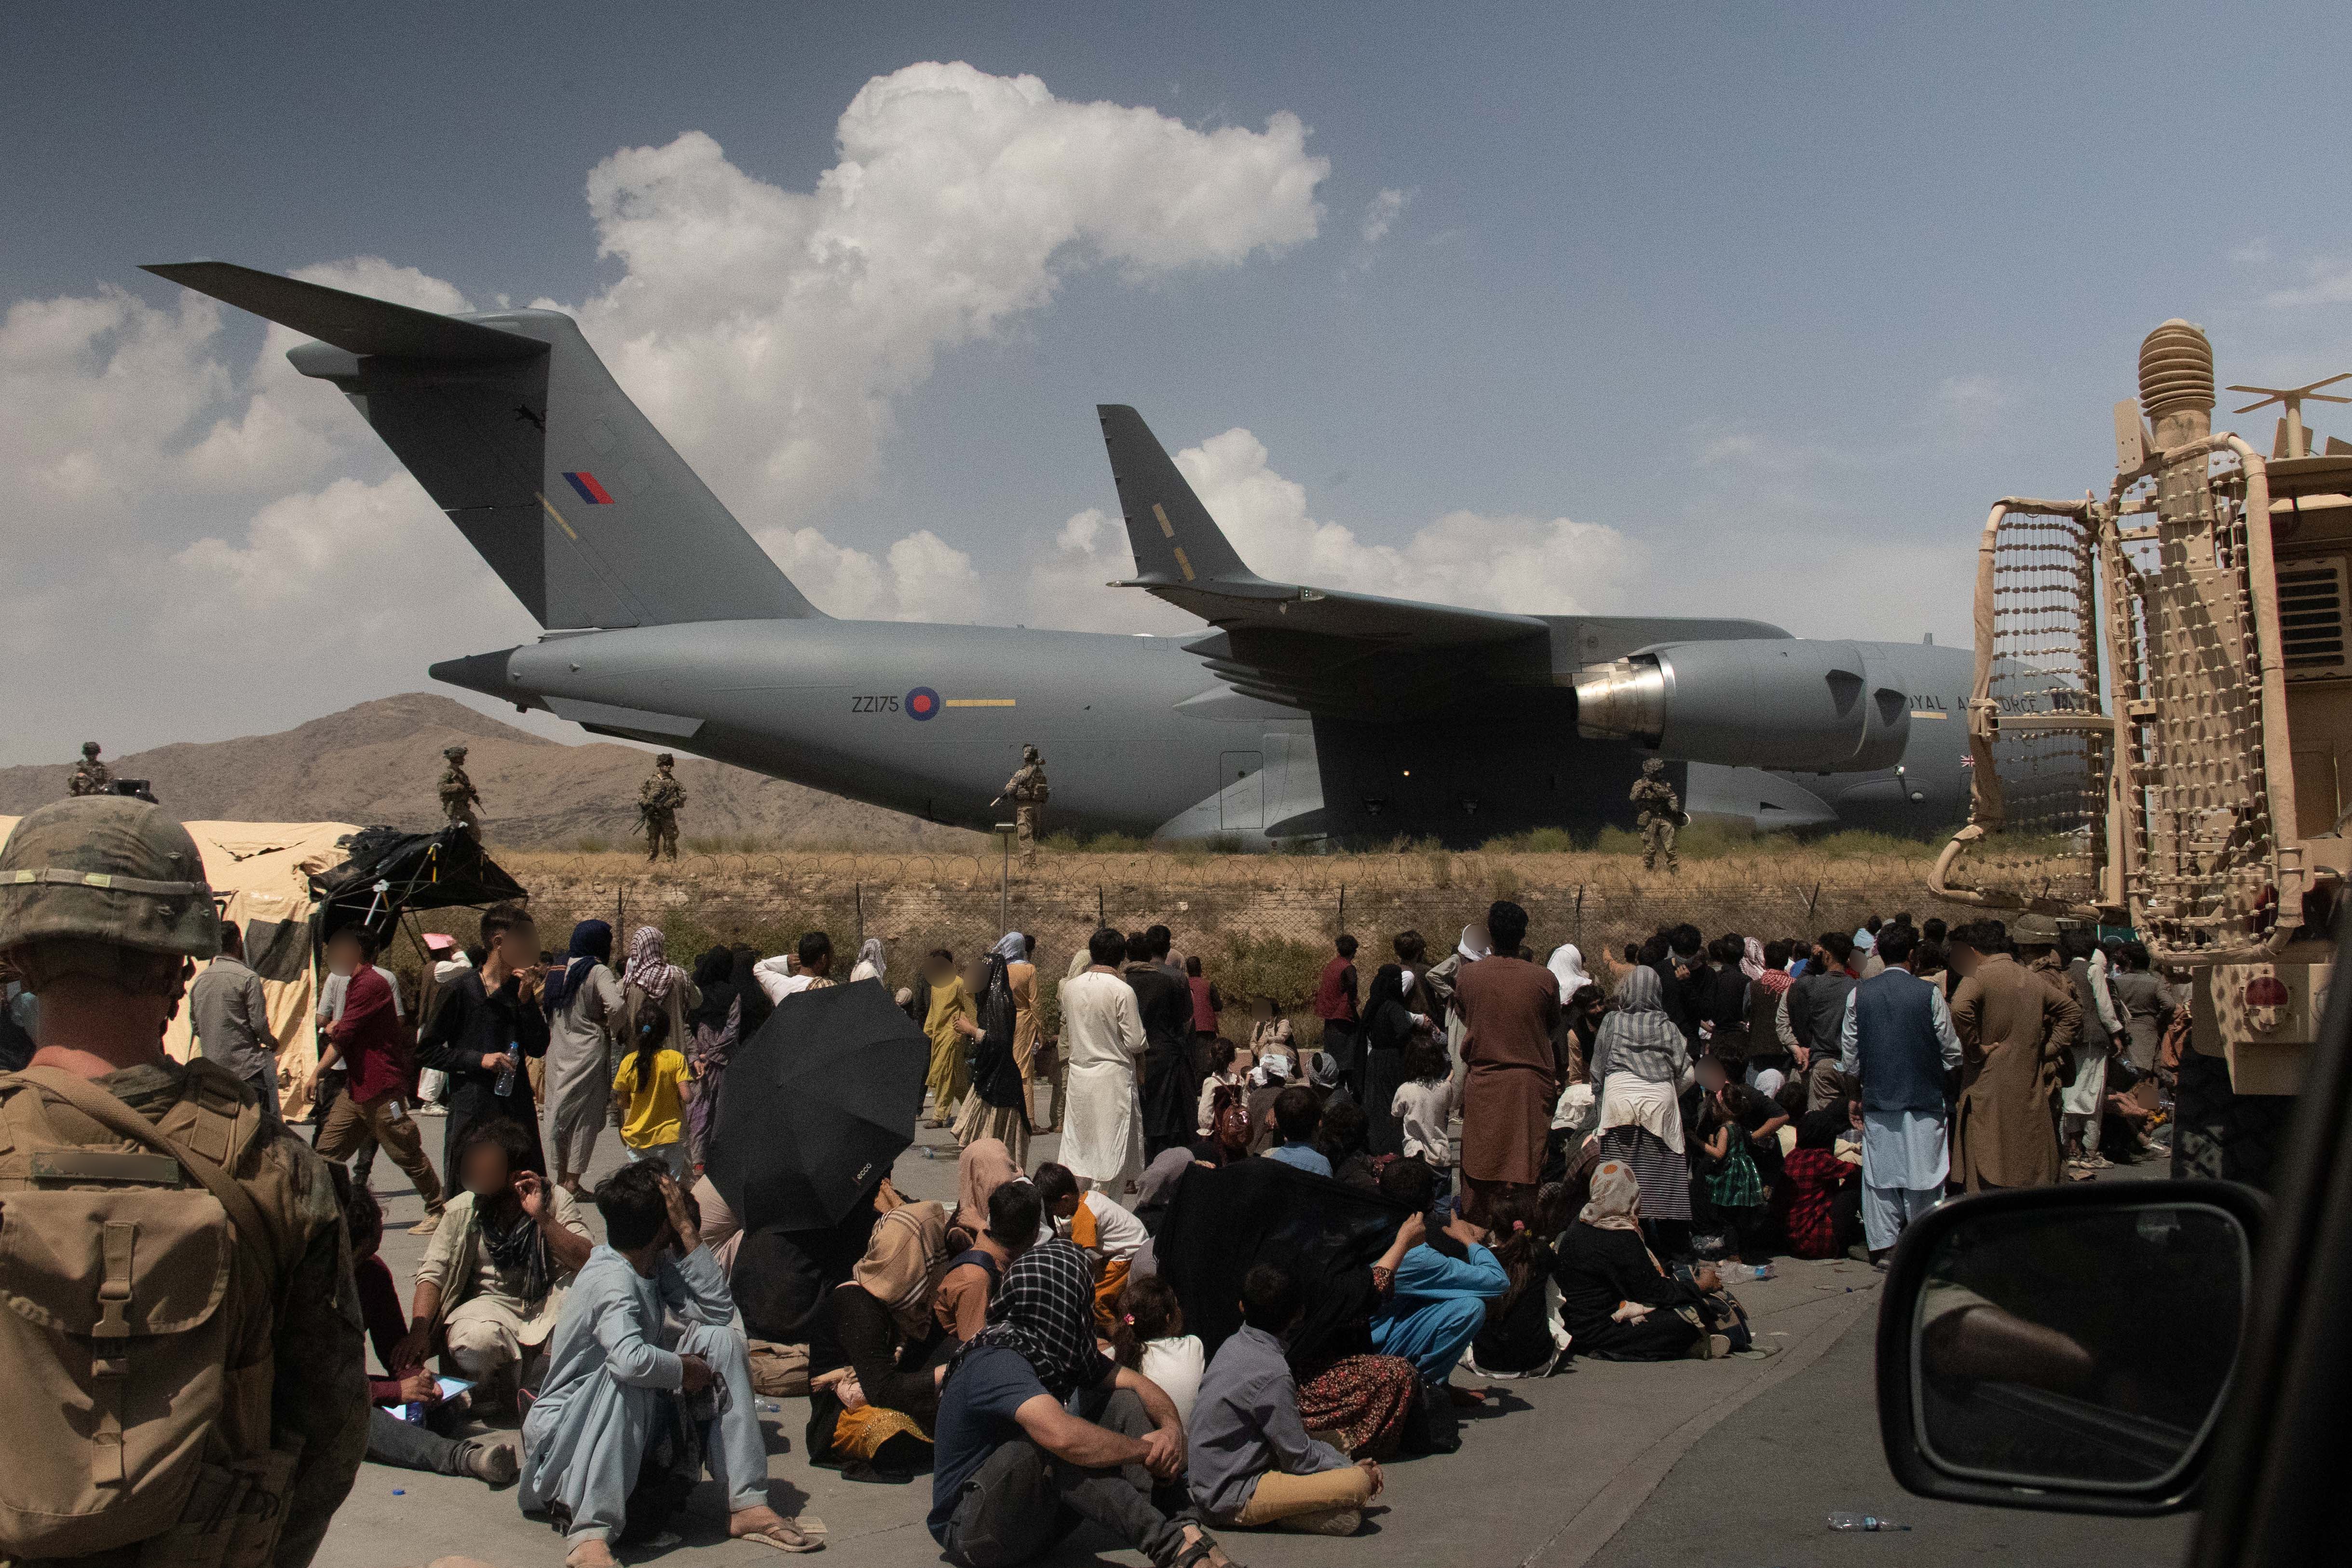 Members of the UK armed forces taking part in the evacuation at Kabul airport last August